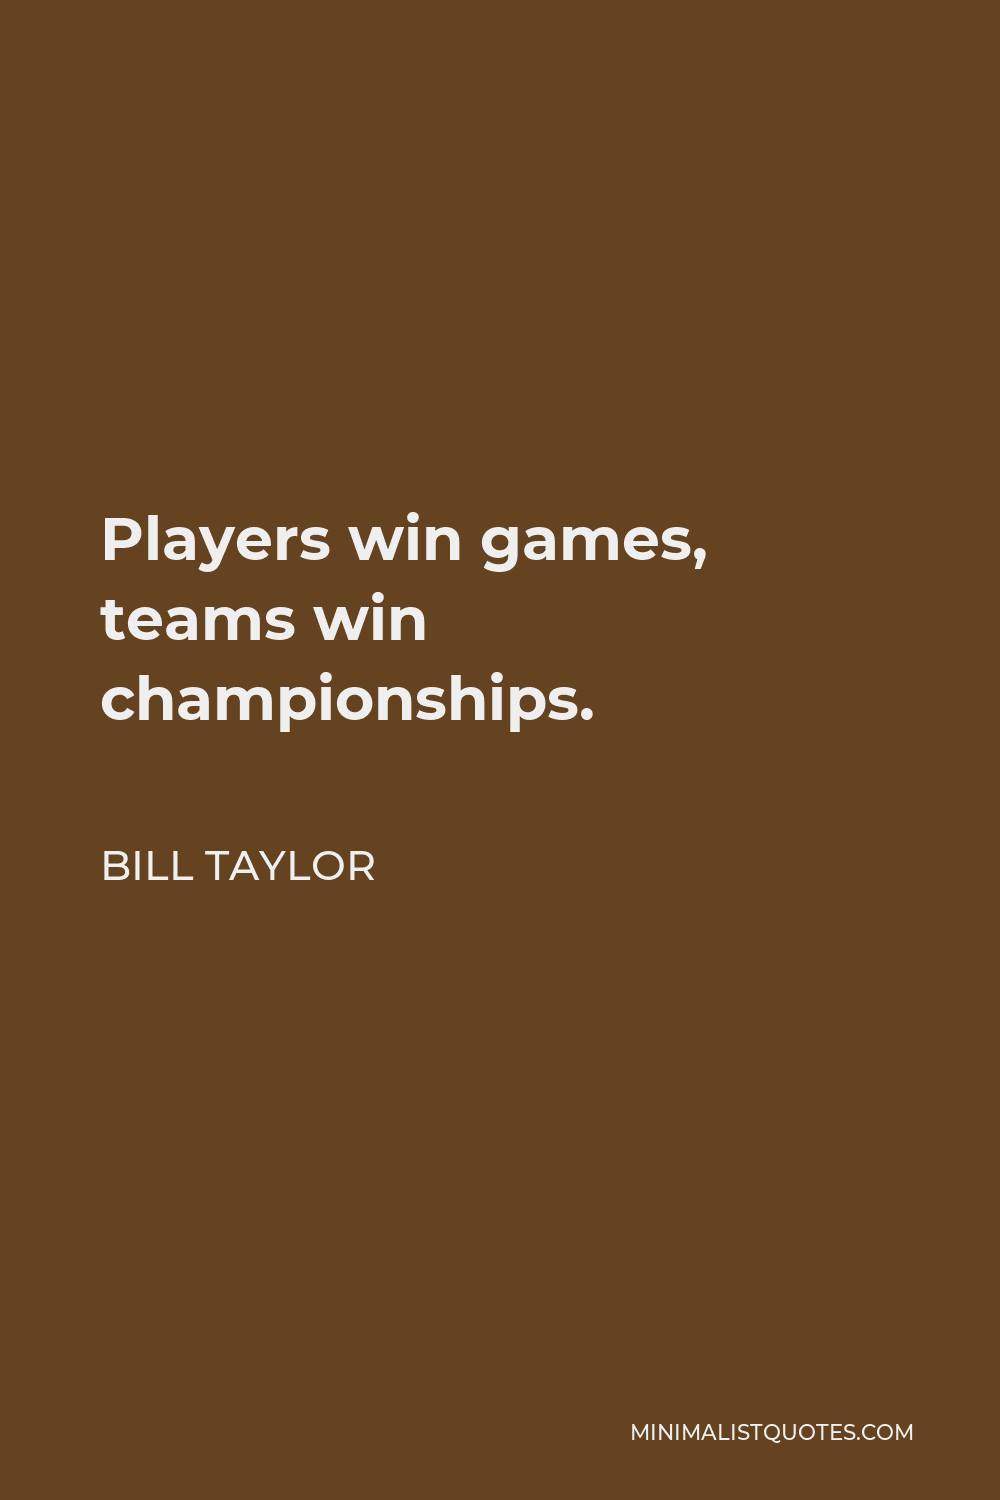 Bill Taylor Quote - Players win games, teams win championships.